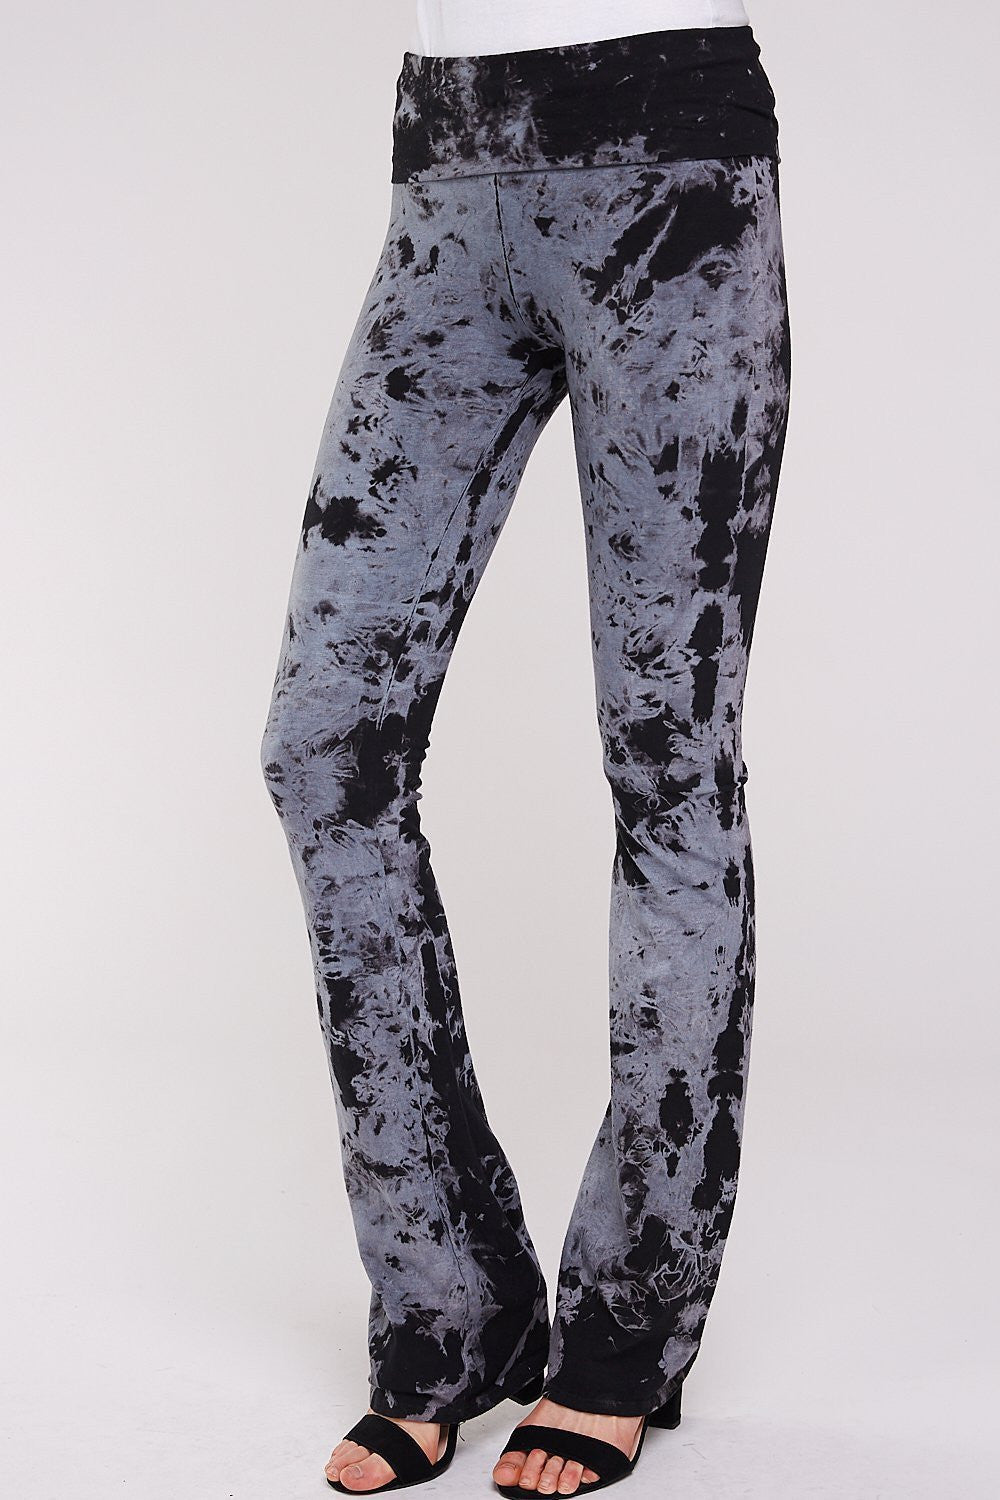 Front side Black Crystal Marble tie dye Fold over Yoga Pant 